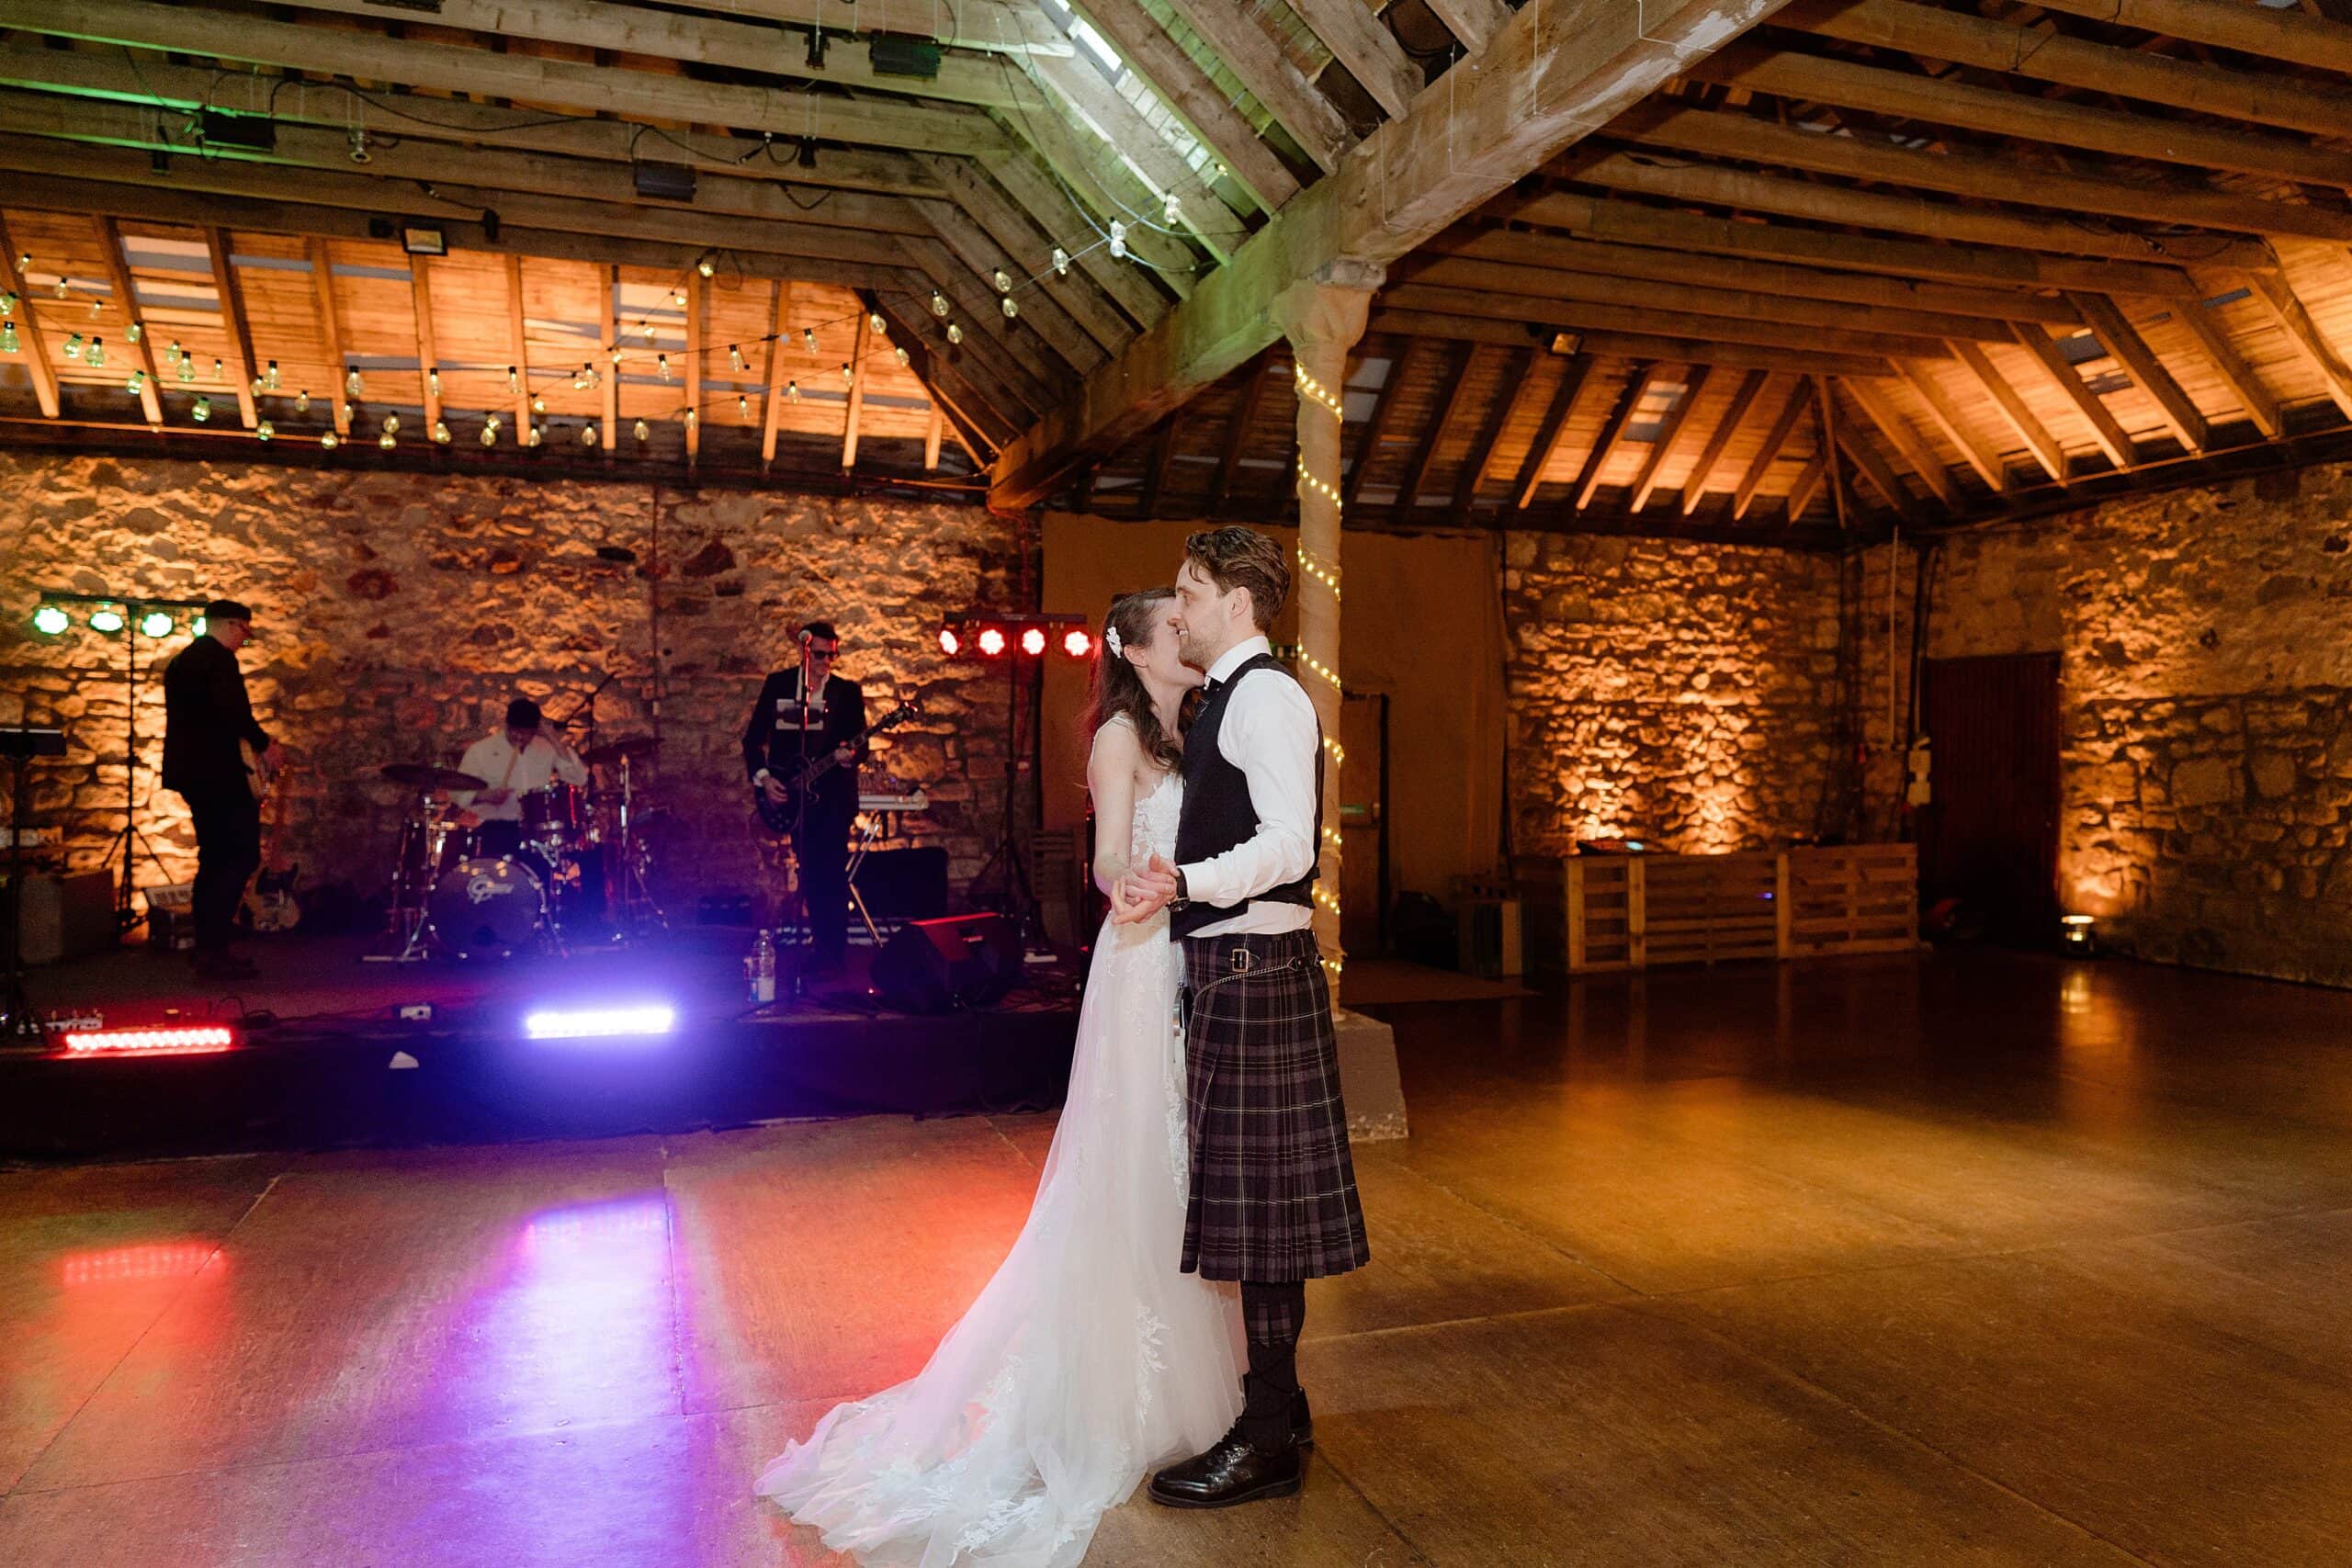 the bride and groom's first dance with a band playing on a stage in the background captured by st andrews wedding photographer